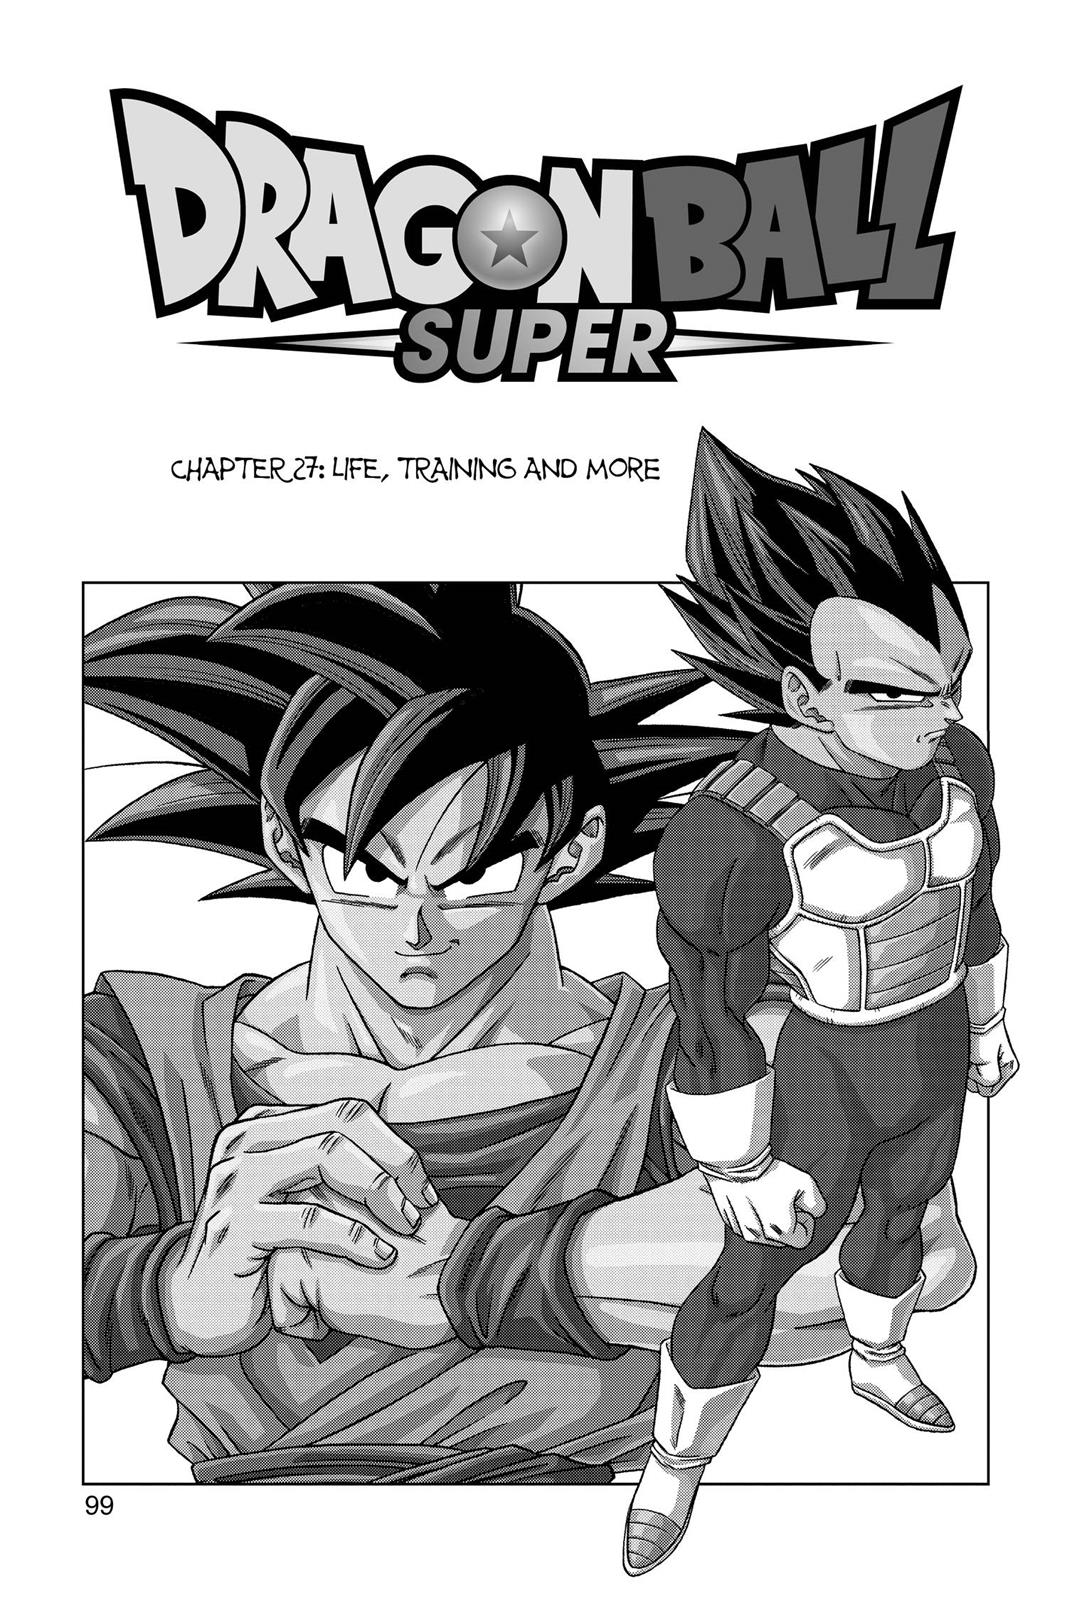 Dragon Ball Super chapter 92 with the return of Broly en 2023